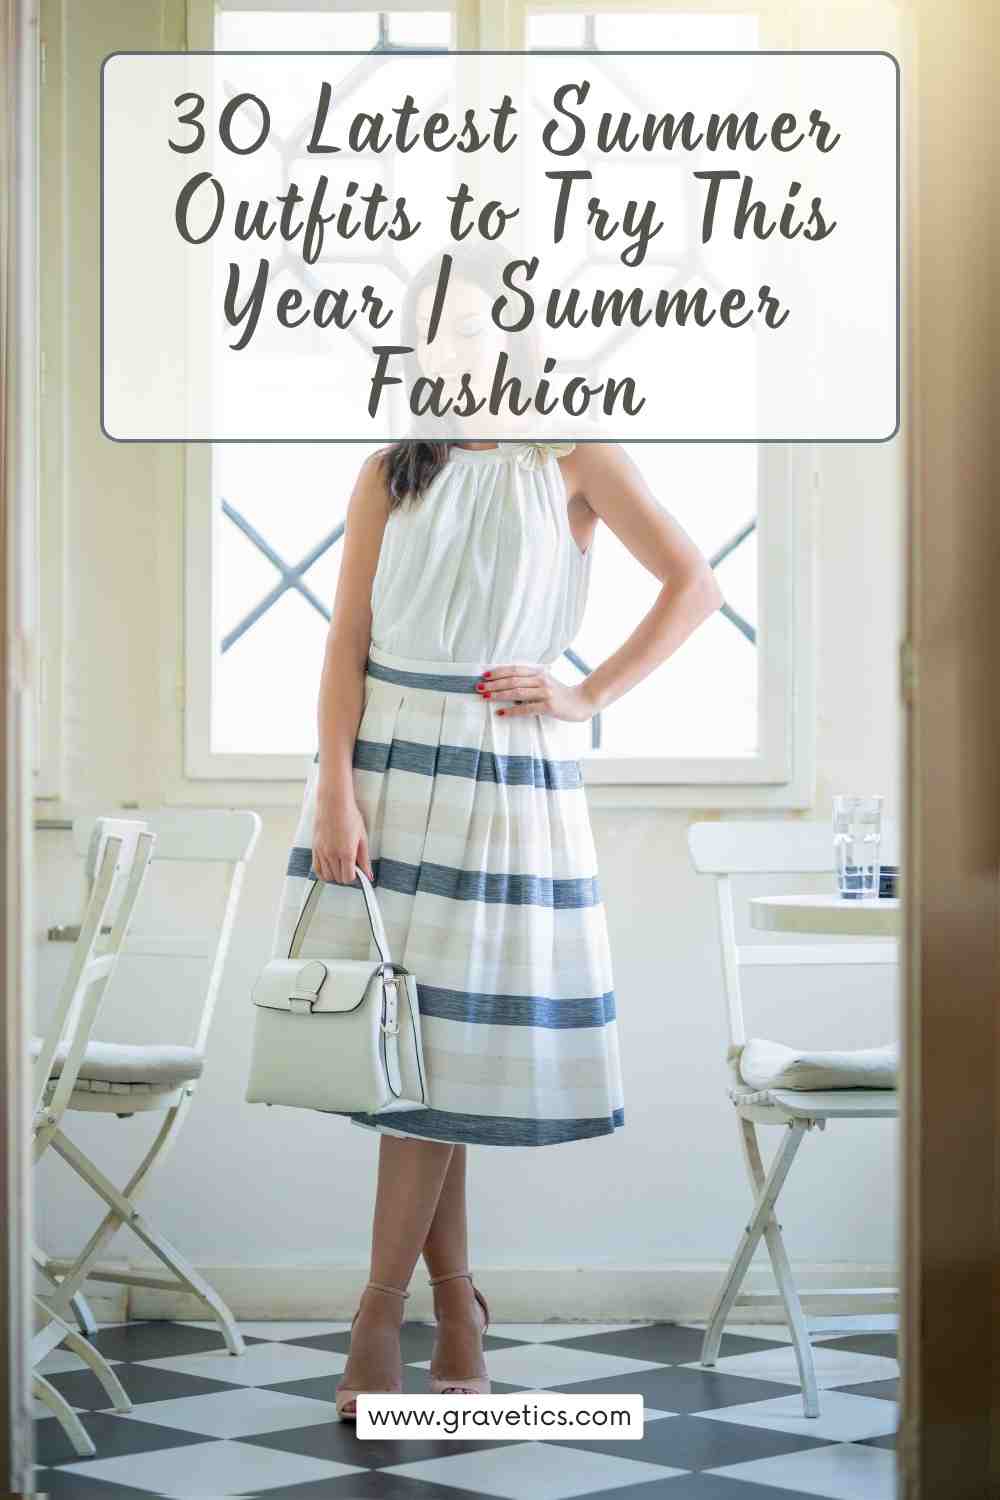 30 Latest Summer Outfits to Try This Year | Summer Fashion